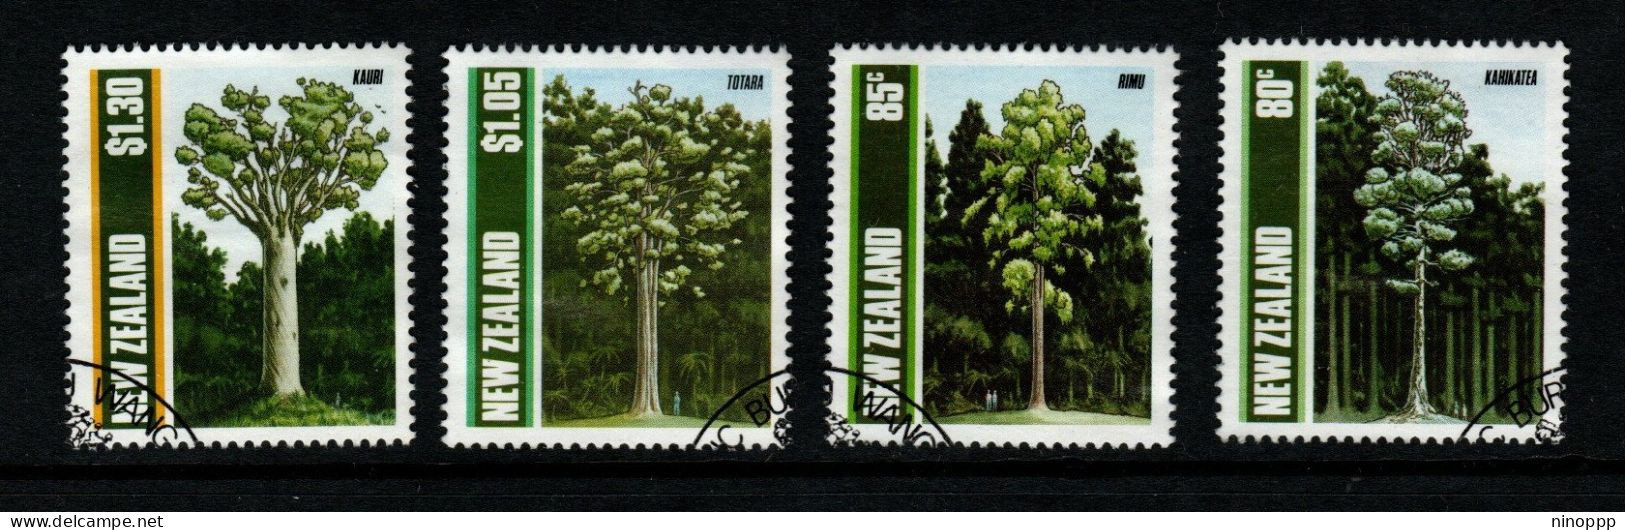 New Zealand SG 1511-14  1989 Trees,used - Used Stamps